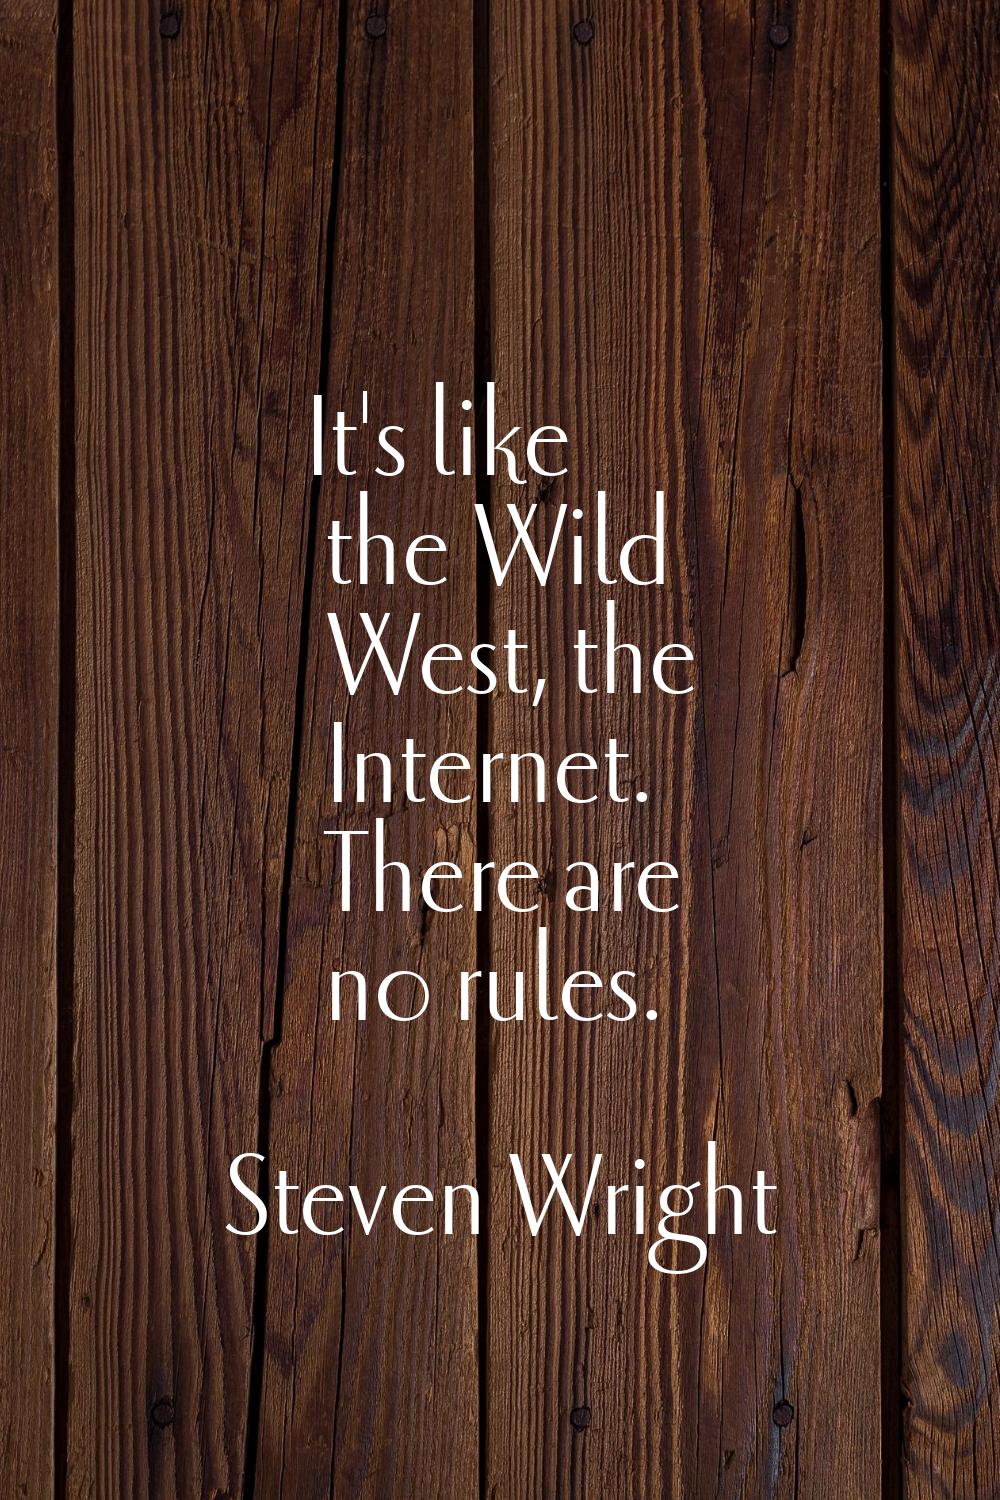 It's like the Wild West, the Internet. There are no rules.